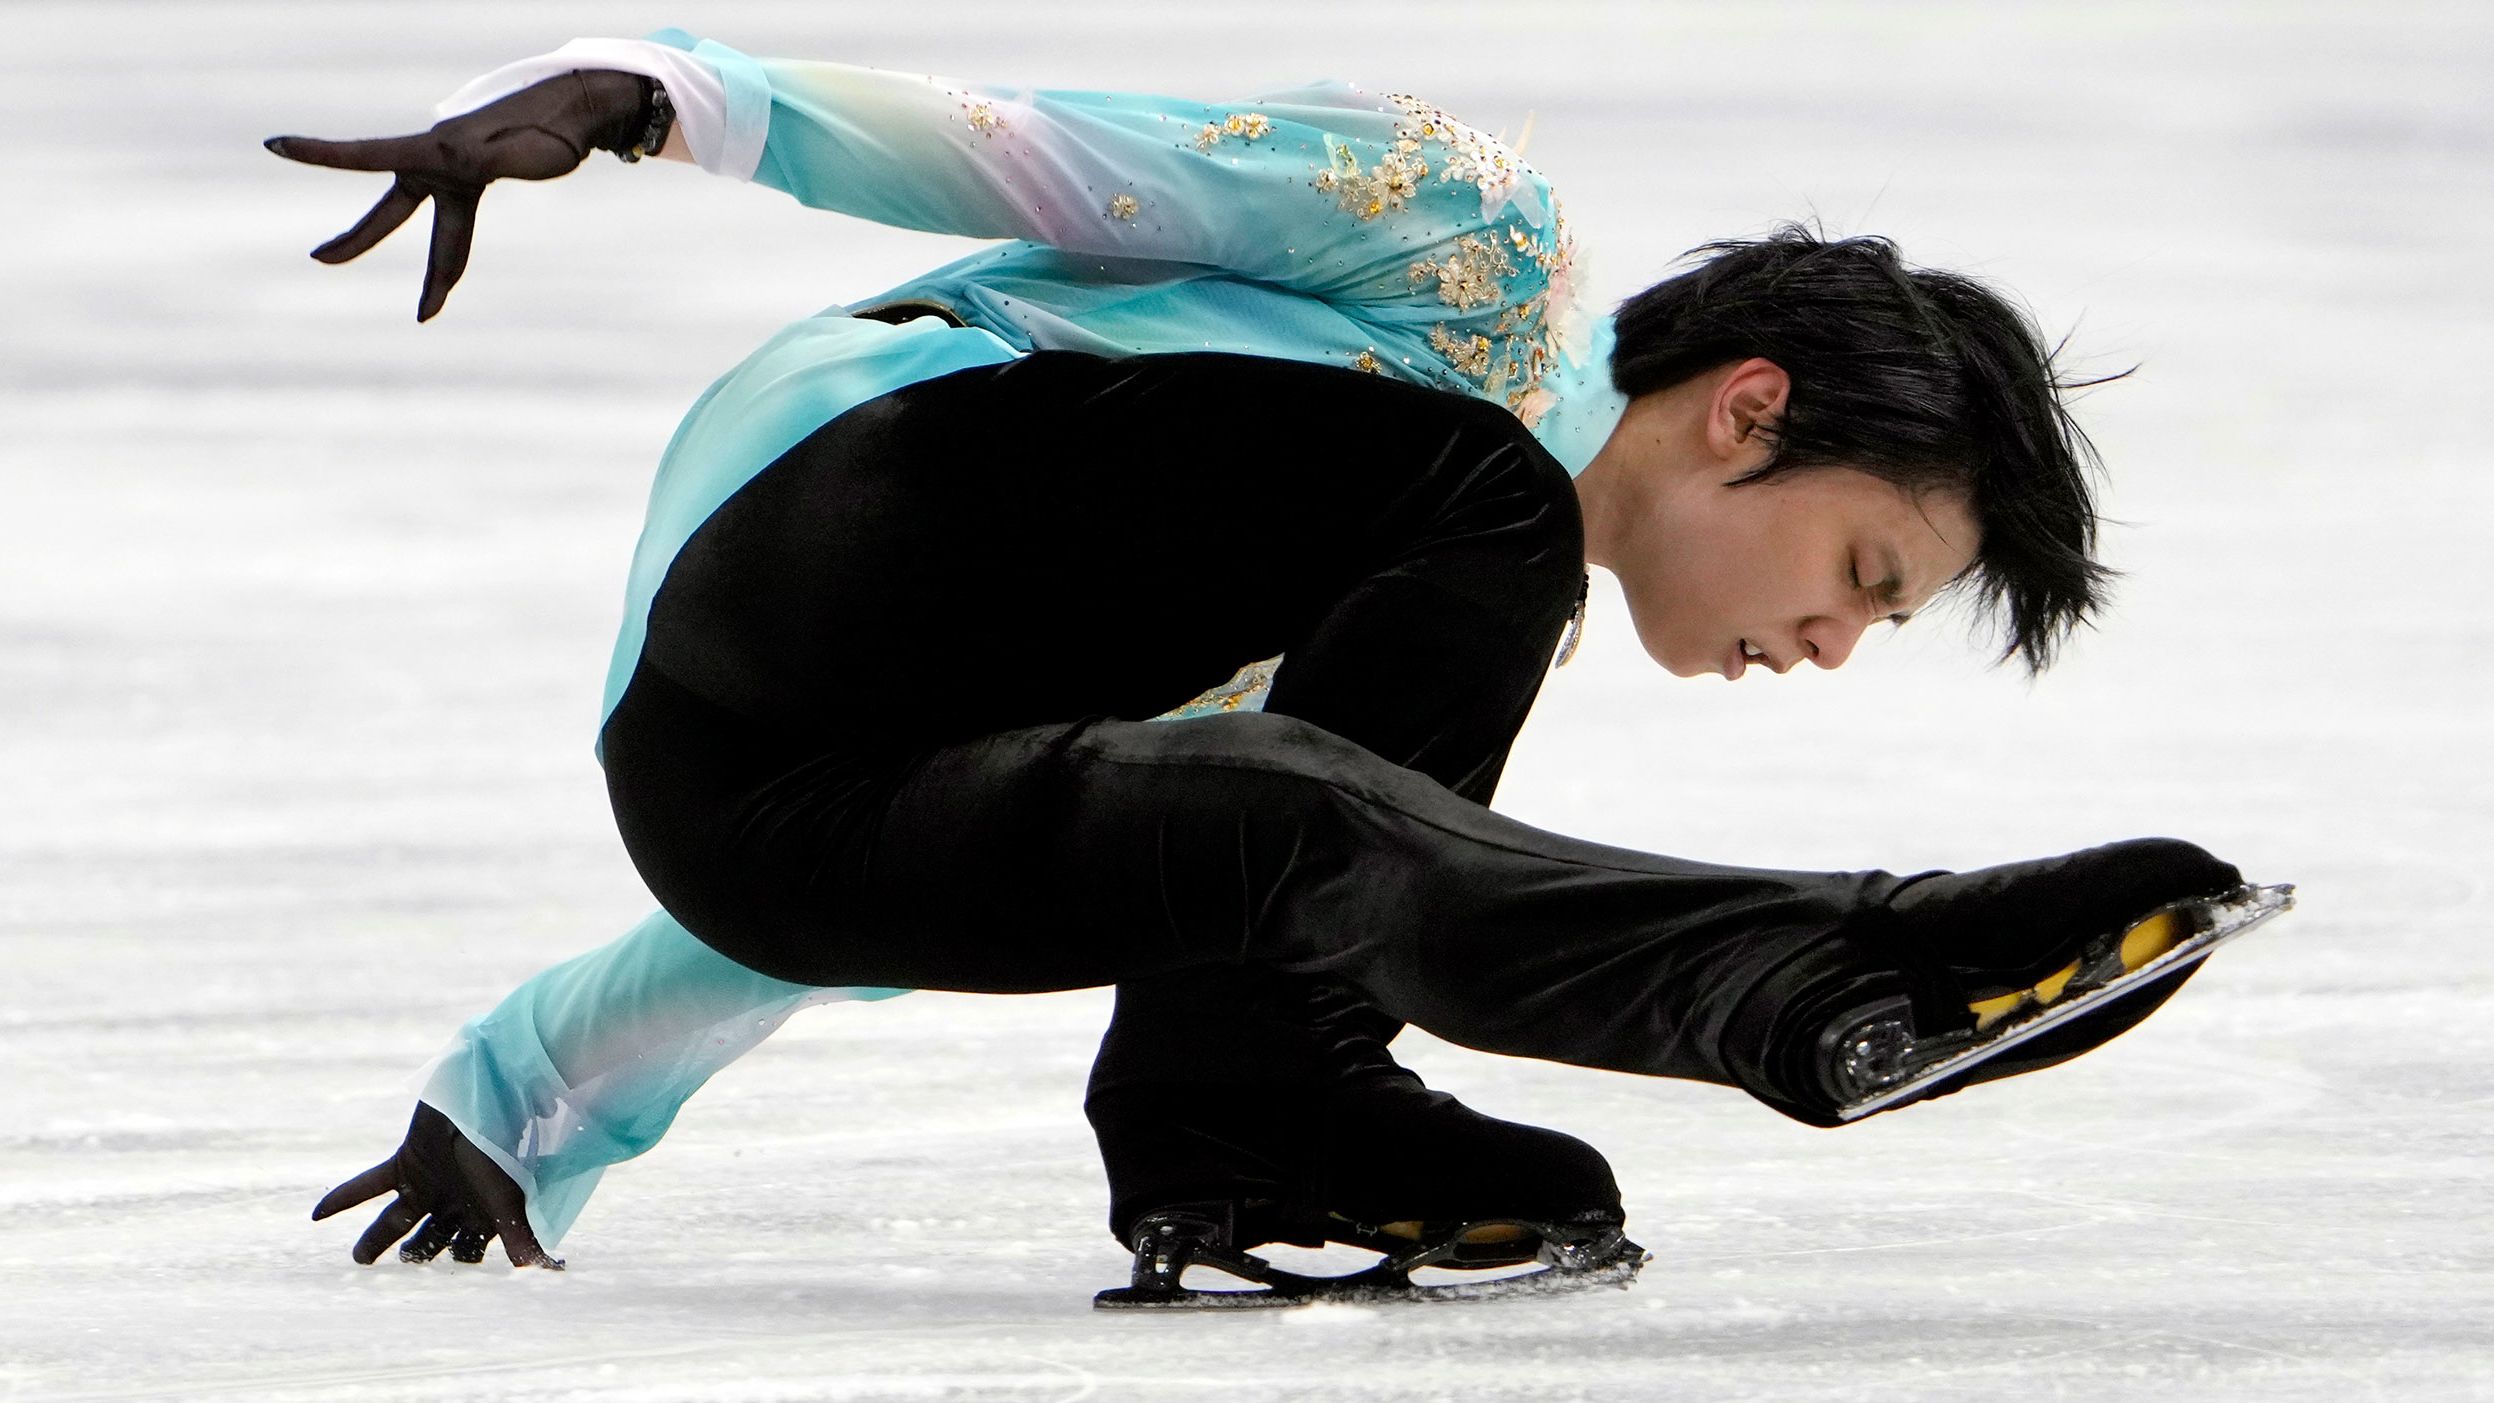 <strong>Yuzuru Hanyu (Japan):</strong> Hanyu, one of the greatest male figure skaters in history, is looking for his third straight Olympic gold in singles. He was just 19 at the 2014 Sochi Games, where he became figure skating's <a href="http://www.cnn.com/2014/02/14/sport/olympics-day-seven-hanyu/index.html" target="_blank">youngest Olympic champion since 1948.</a> He also became the first Asian skater to win the men's singles title. Hanyu's fans throw Winnie the Pooh bears on the ice after he performs; <a href="https://www.cnn.com/2018/02/16/sport/yuzuru-hanyu-winnie-the-pooh/index.html" target="_blank">the tradition</a> started after he began carrying a tissue box in the shape of the character back in 2010.